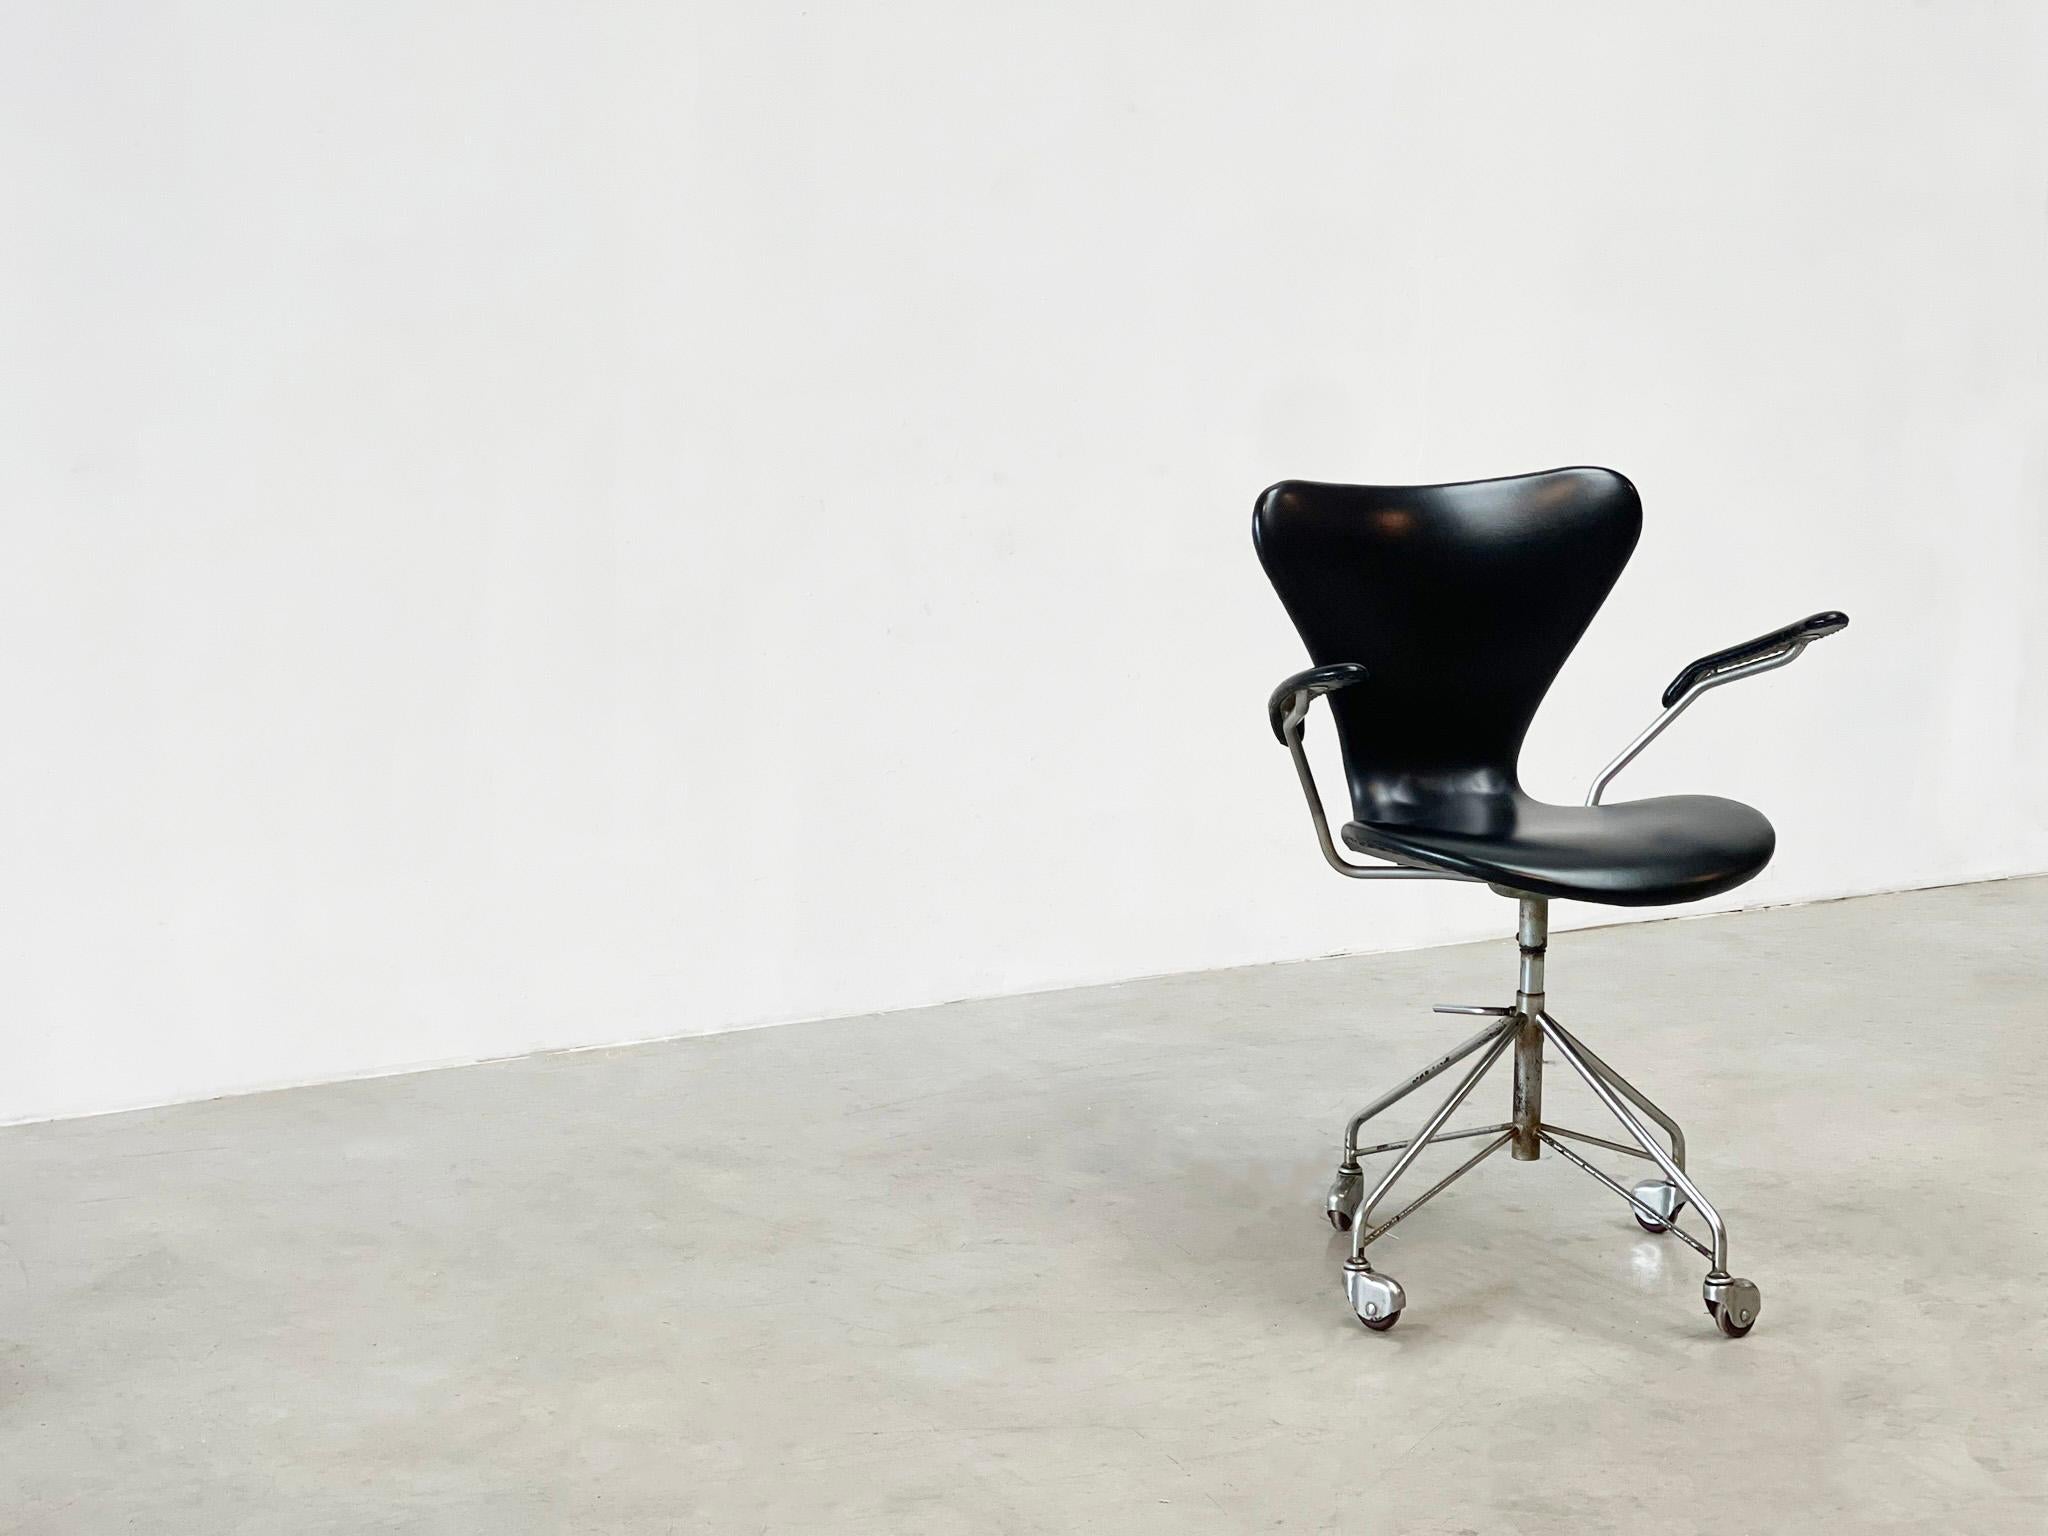 Early 3217 office chair by 1 of Denmark's most famous and best designers Arne Jacobsen. Arne Jacobsen designed this office chair in the 50s for Fritz Hansen.

 

This particular chair is from the 60's so it is an early model. The chair still has the